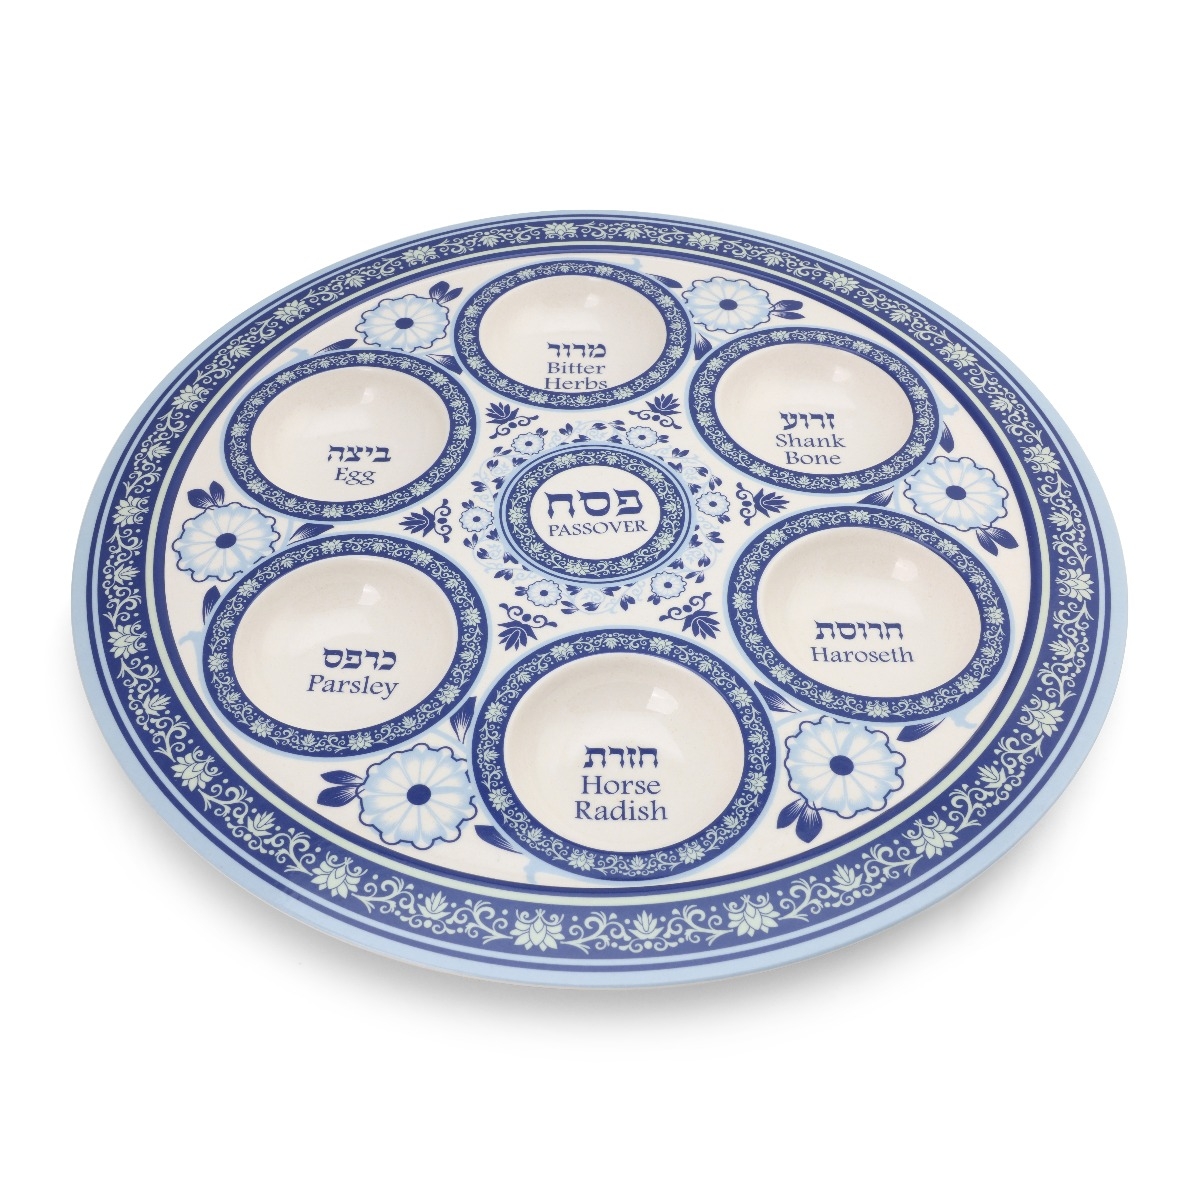 Stylish Passover Seder Plate With Floral Design (Blue) - 1